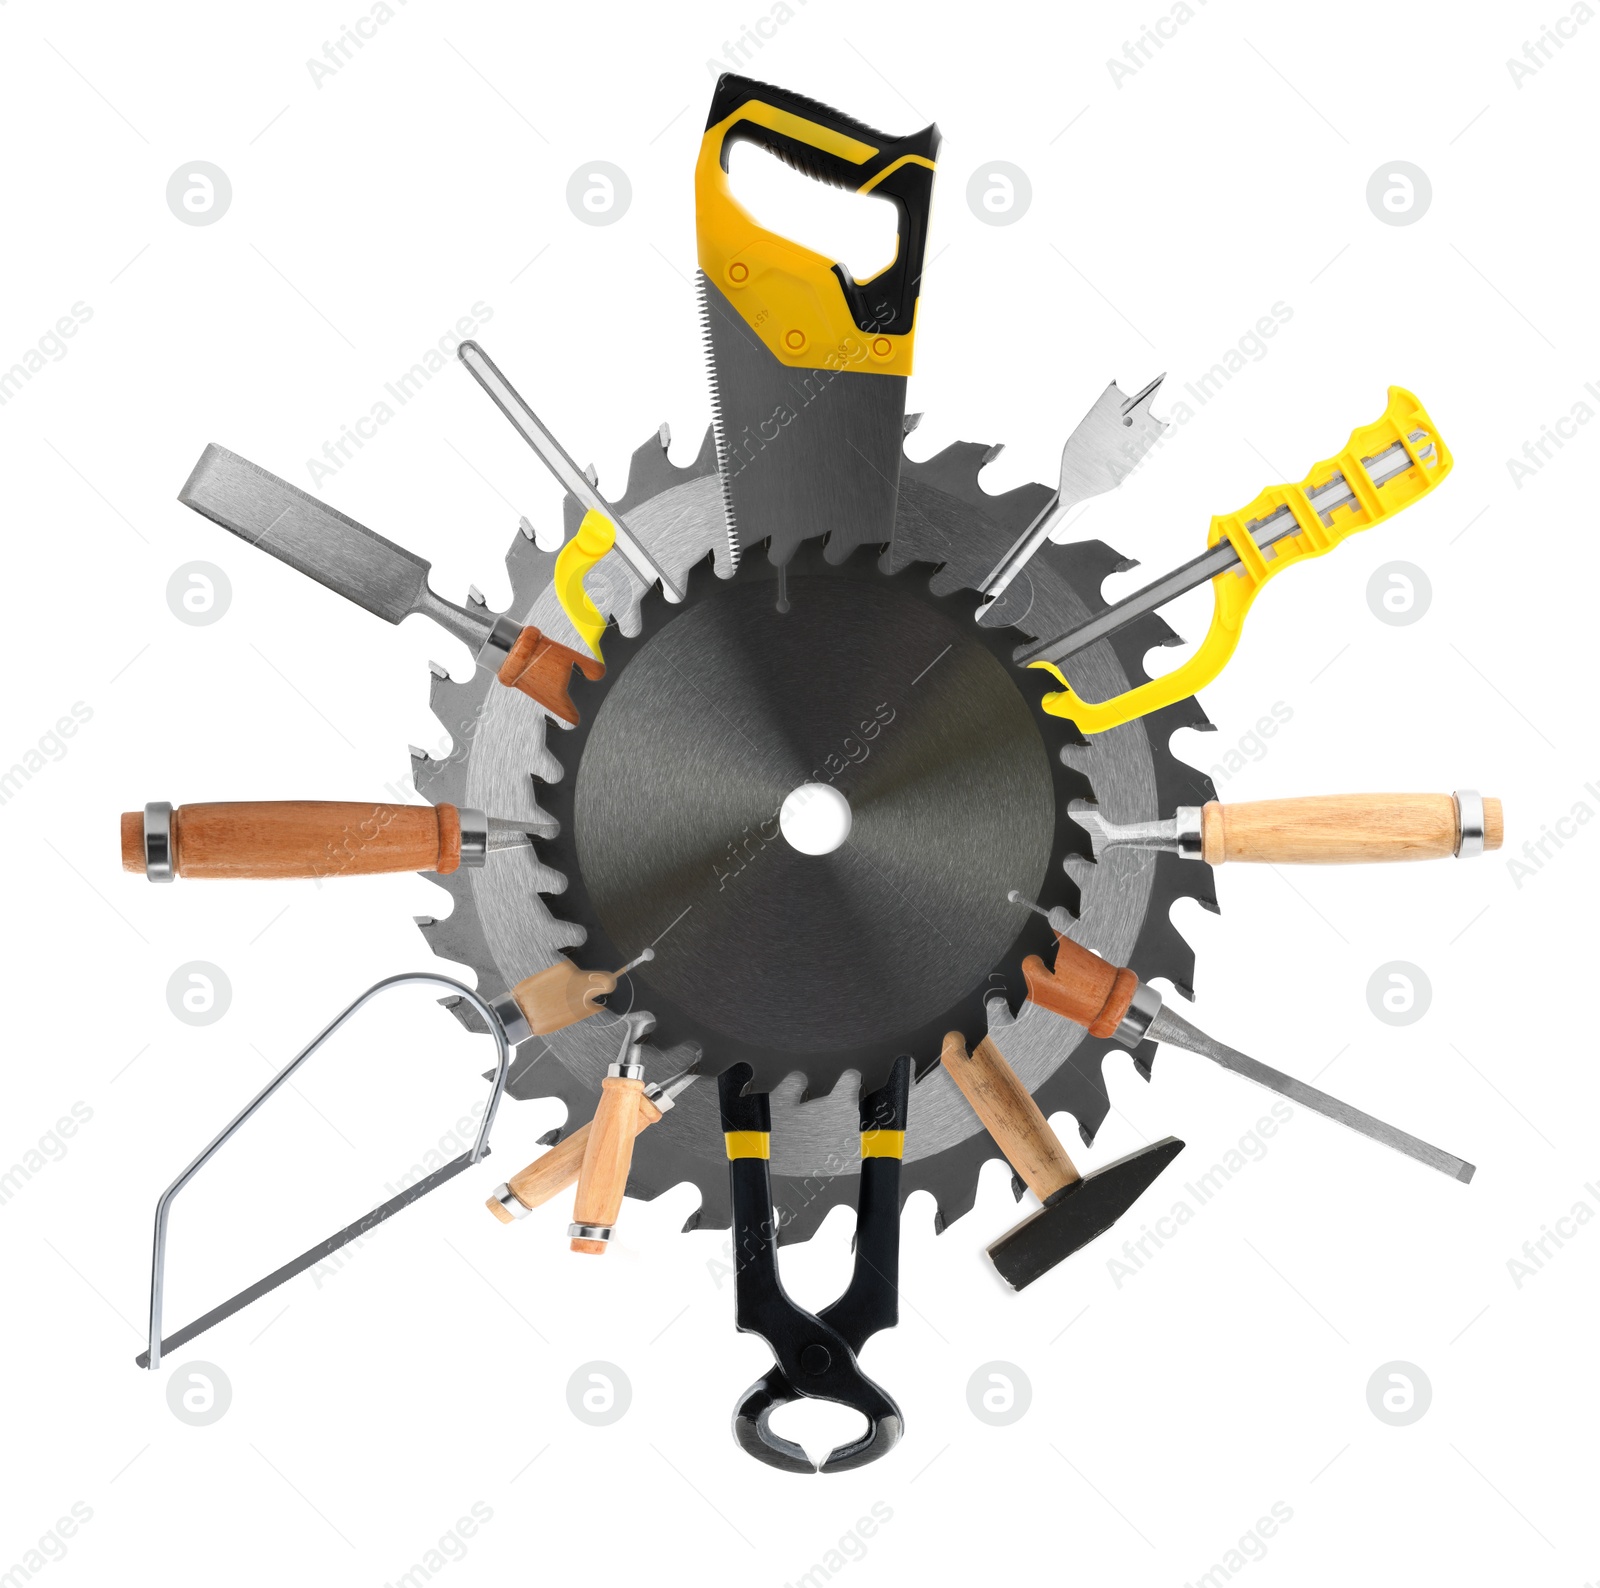 Image of Collage with different modern carpenter's tools on white background